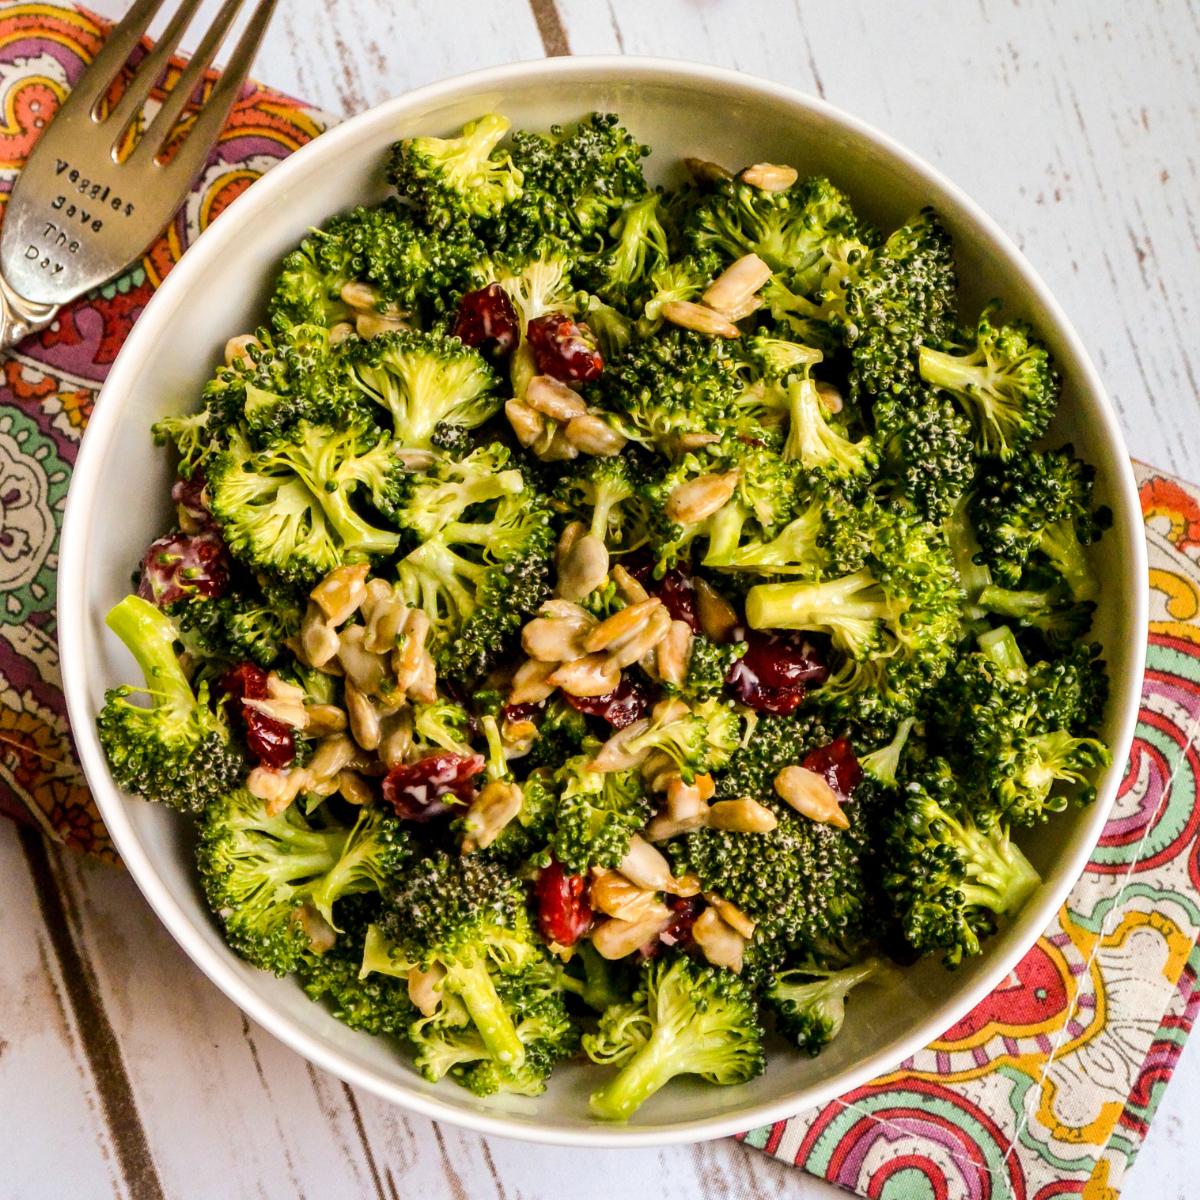 Bowl of Vegan Broccoli Cranberry Salad with a fork on a paisley napkin.